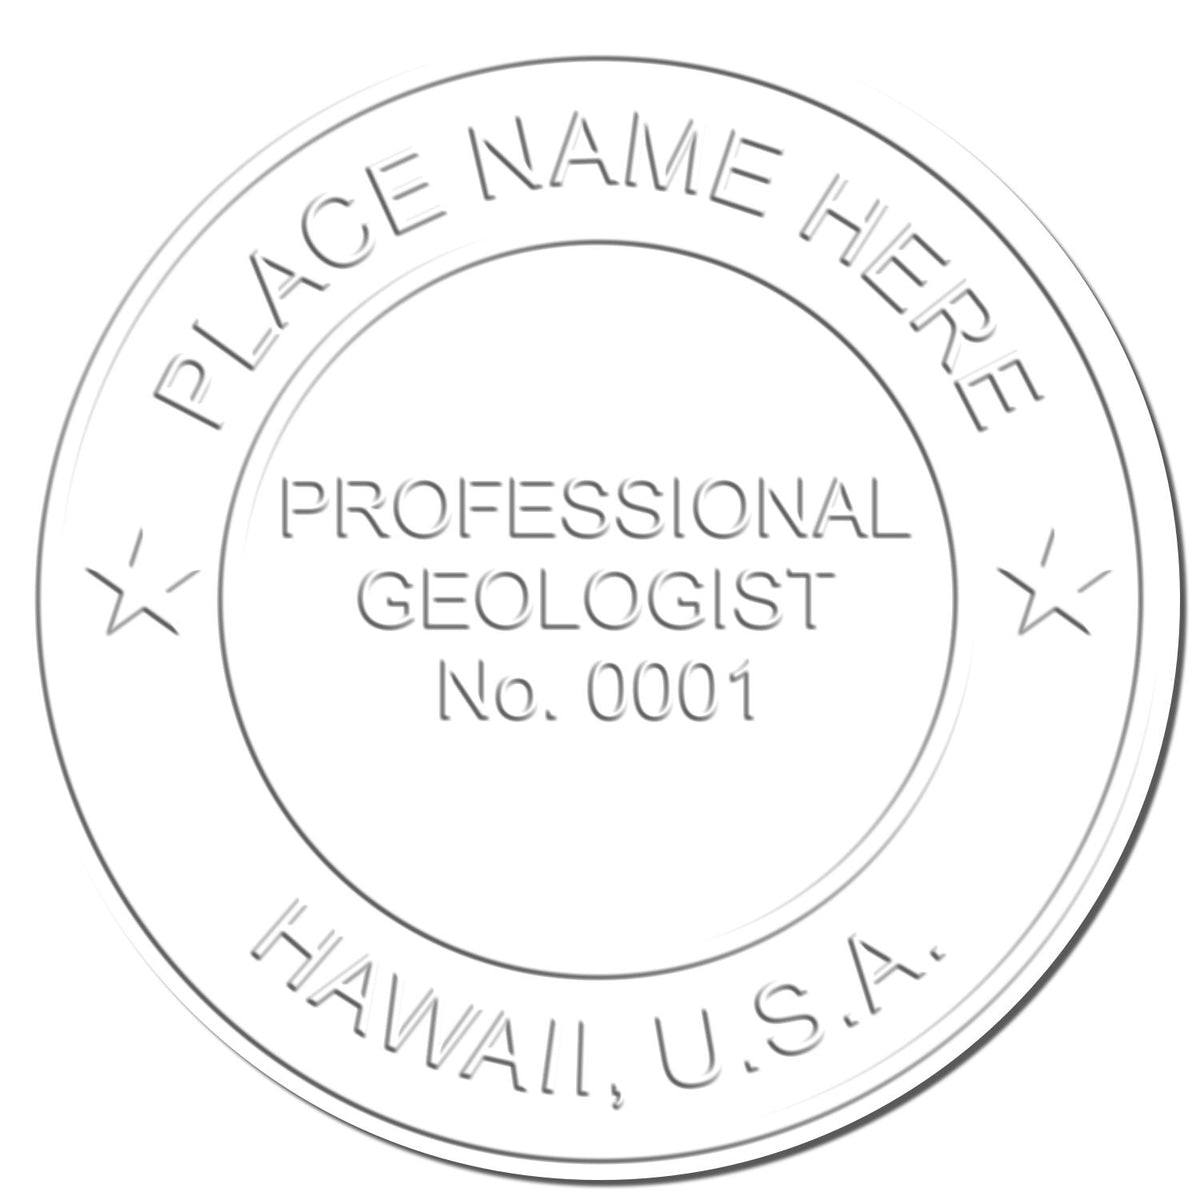 A photograph of the State of Hawaii Extended Long Reach Geologist Seal stamp impression reveals a vivid, professional image of the on paper.